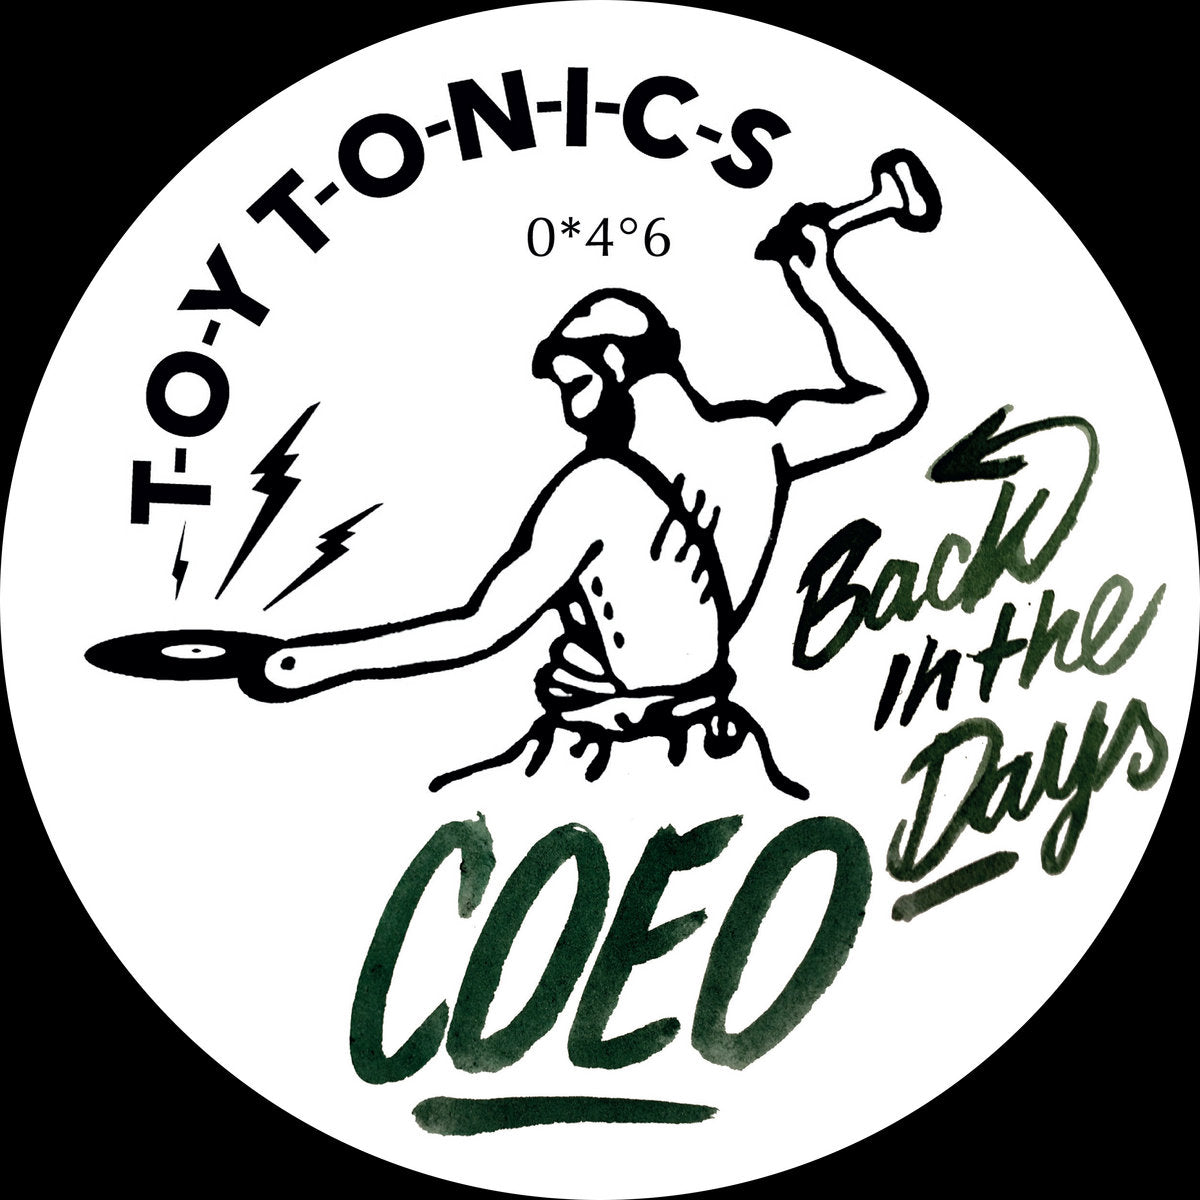 COEO - Back in the Days (12" Vinyl)